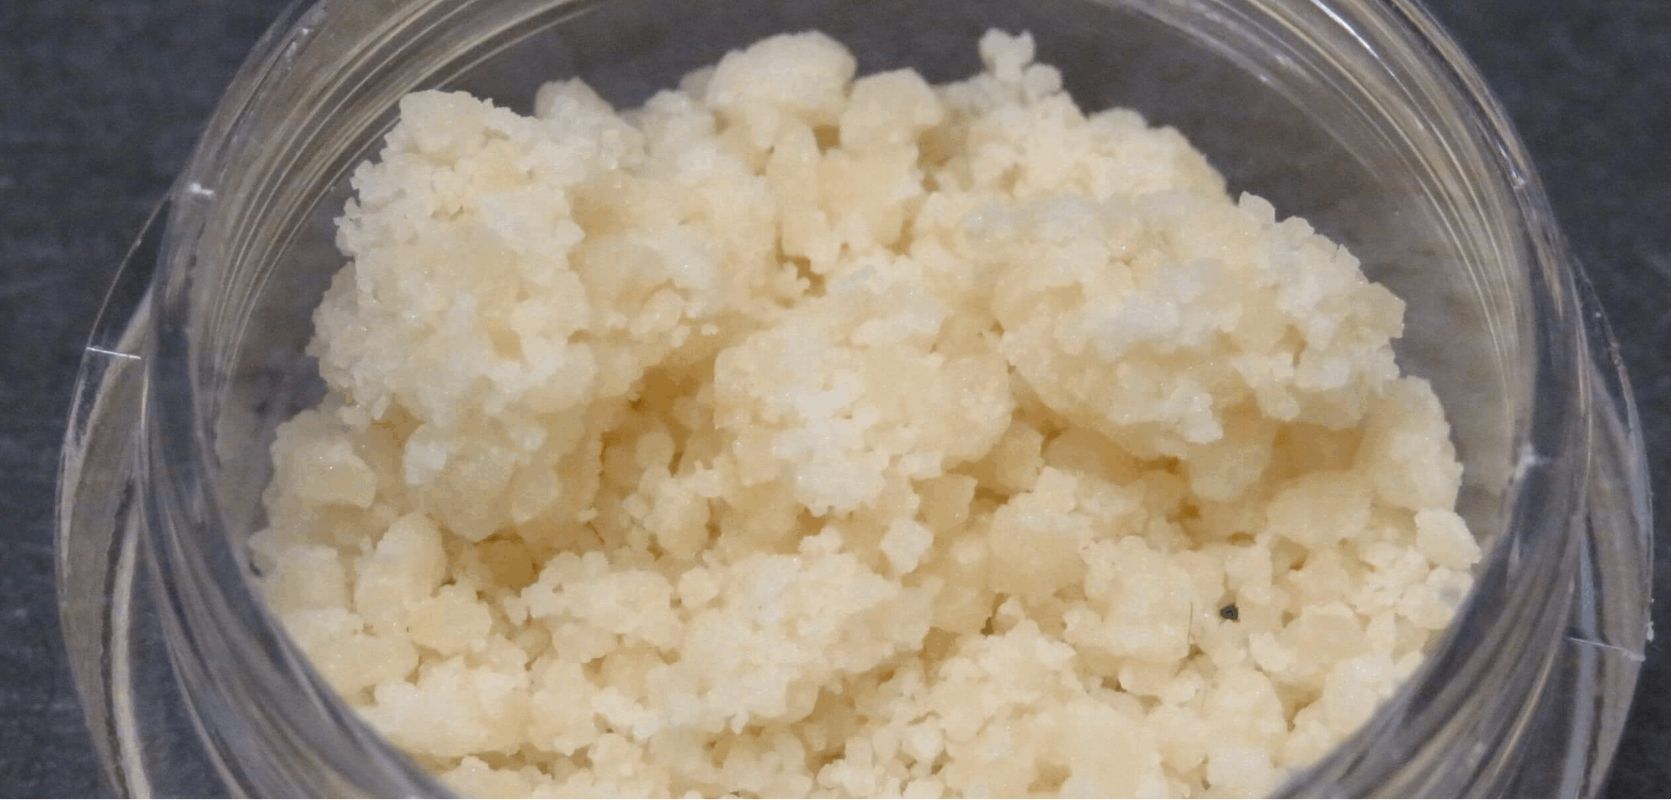 White crumble wax is made like most other concentrates only a slight difference at the end that allows for its characteristic crumbly form.